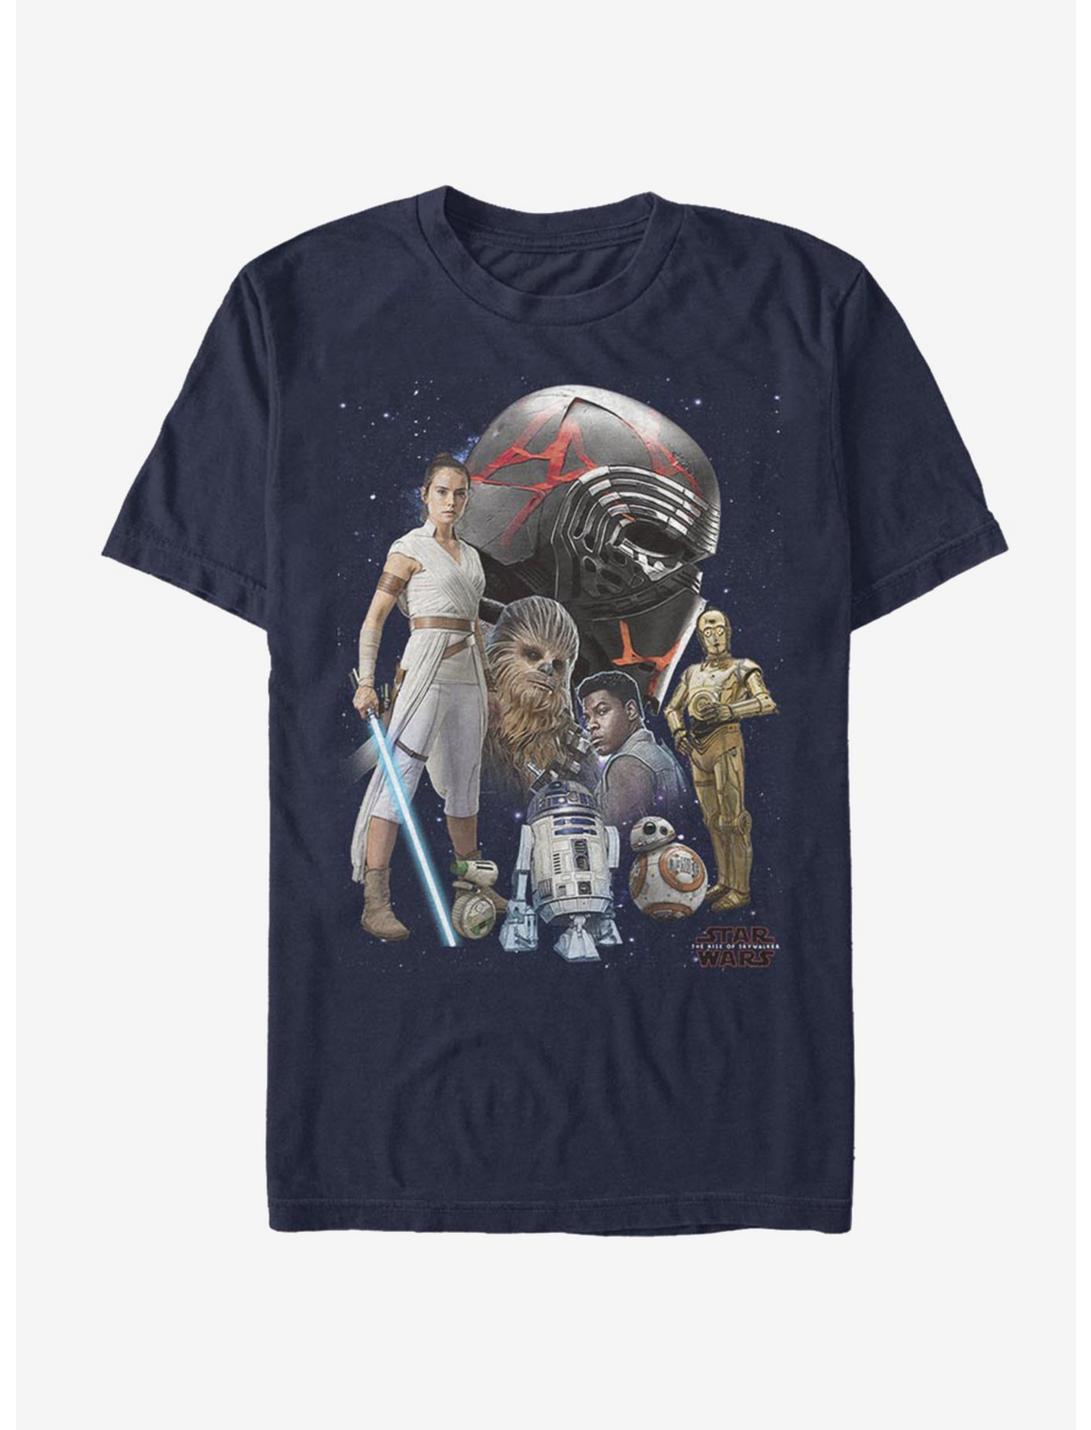 Star Wars Episode IX The Rise Of Skywalker Heroes Of The Galaxy T-Shirt, NAVY, hi-res